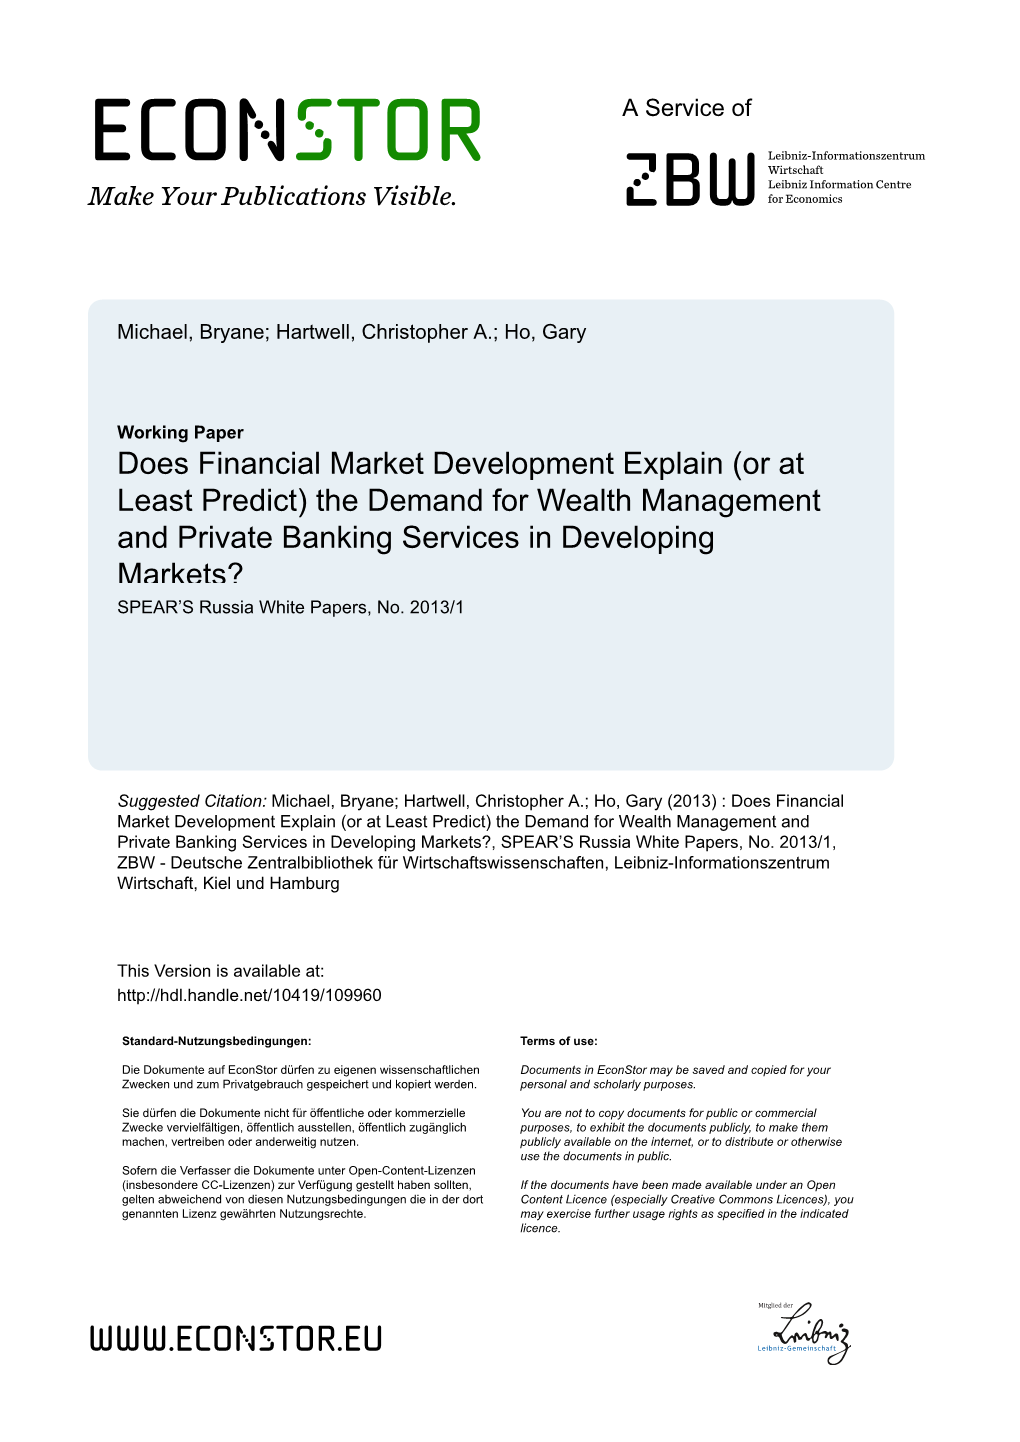 Does Financial Market Development Help Predict Demand for Private